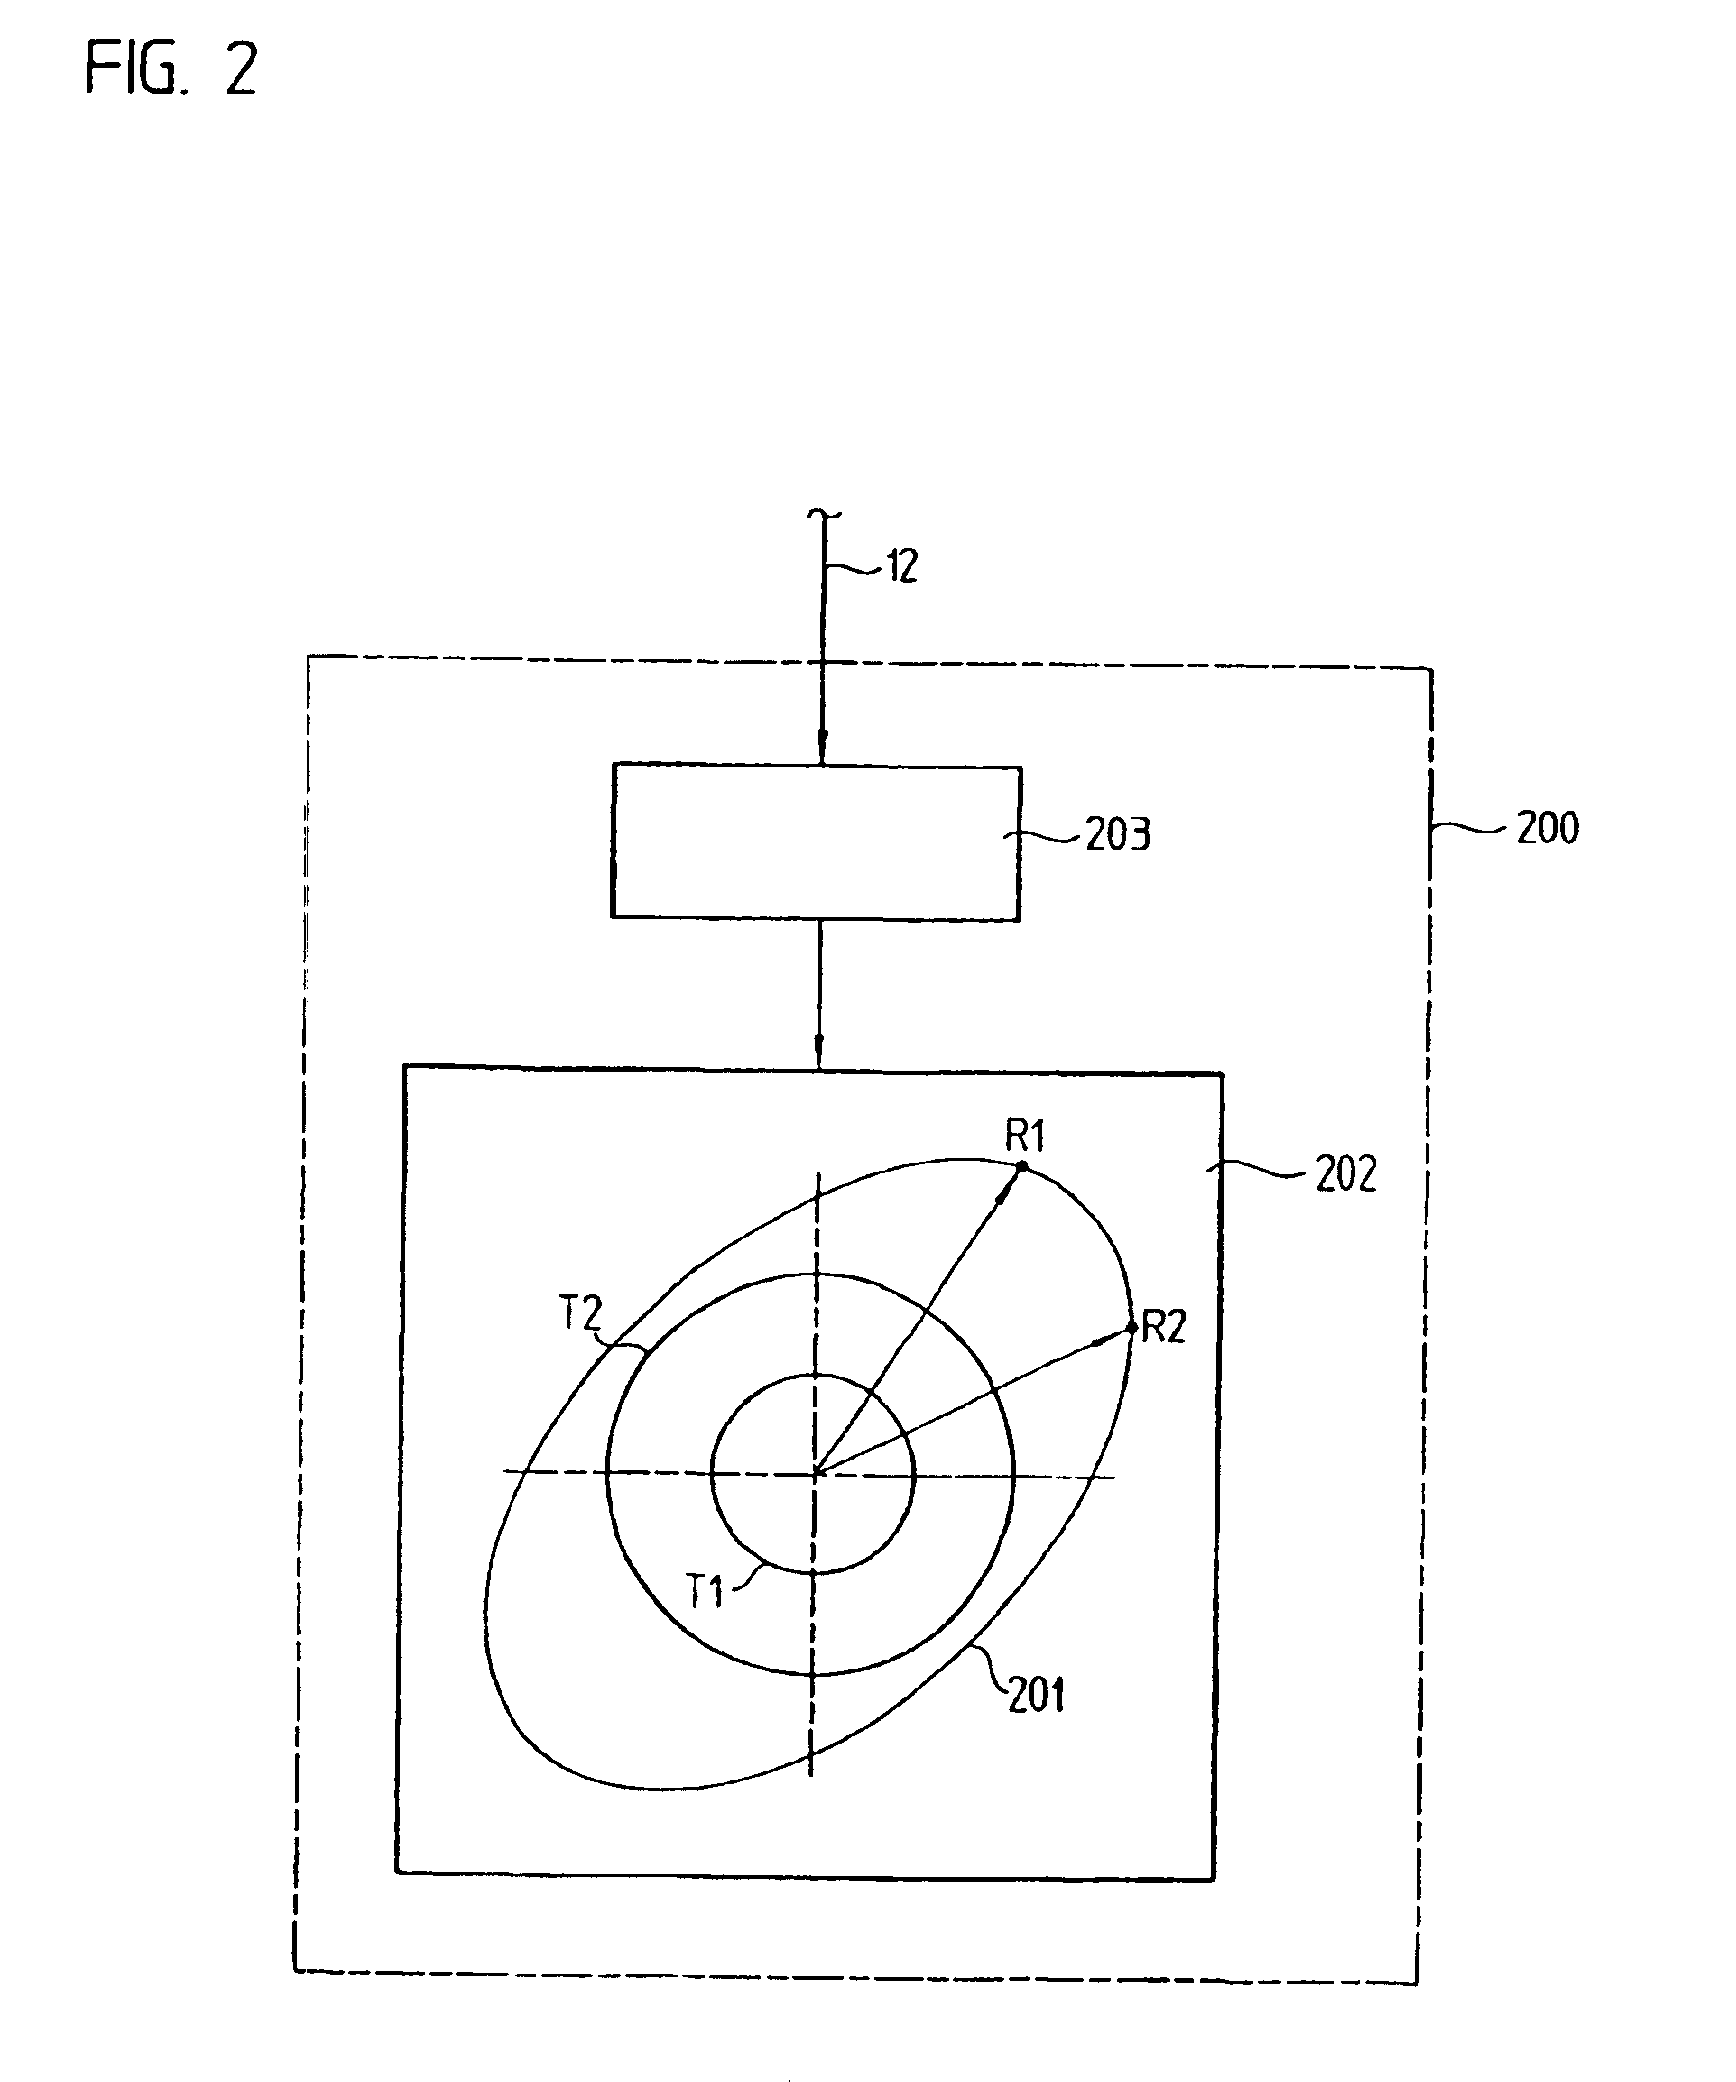 Position measuring device and a method for operating a position measuring device